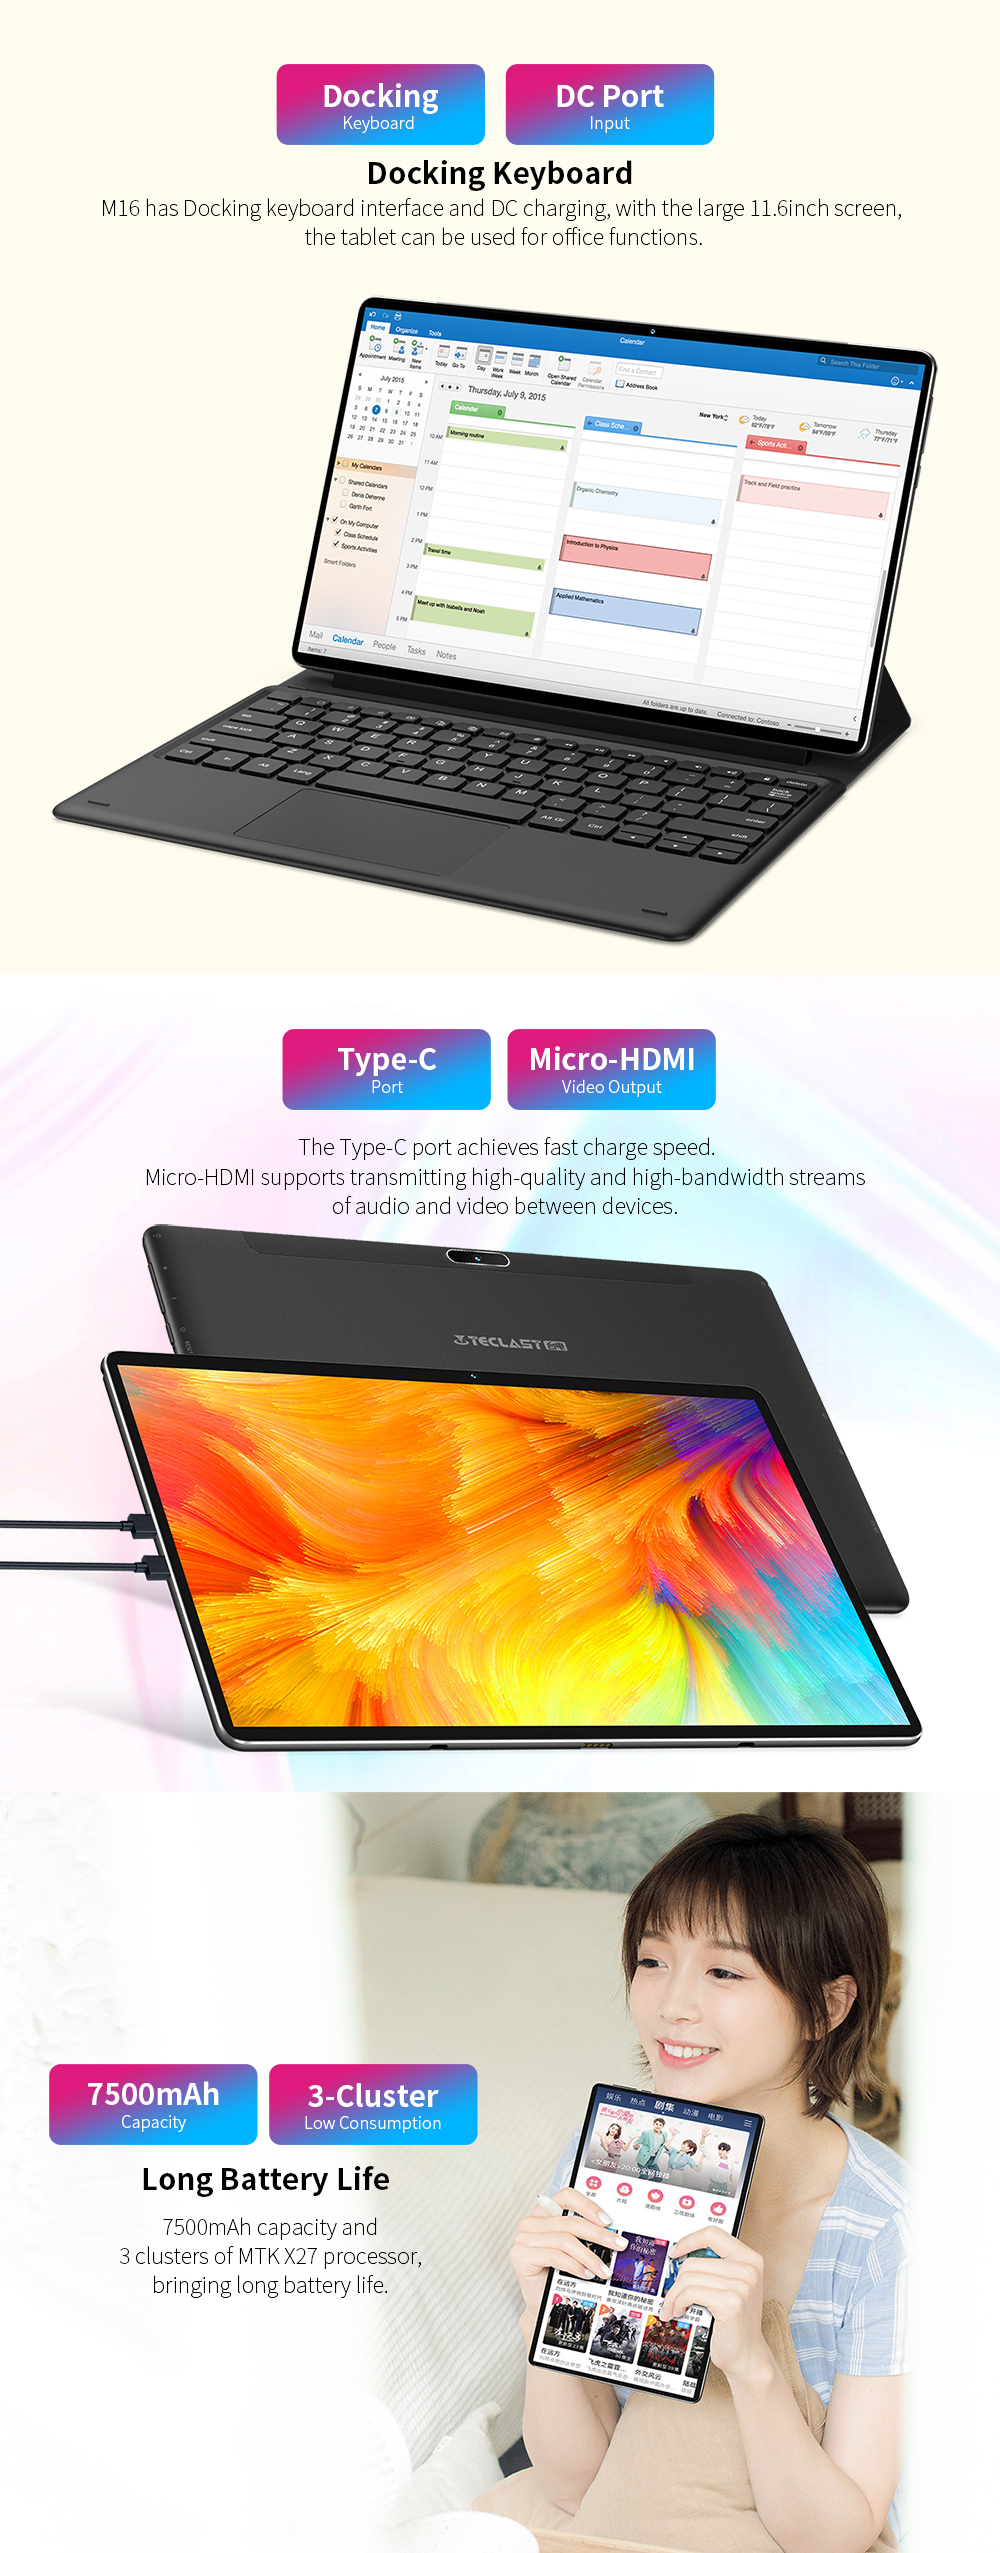 Teclast M16 Helio X27 Deca Core Processor 4GB RAM 128GB ROM 11.6 Inch Android 8.0 Tablet PC with Keyboard